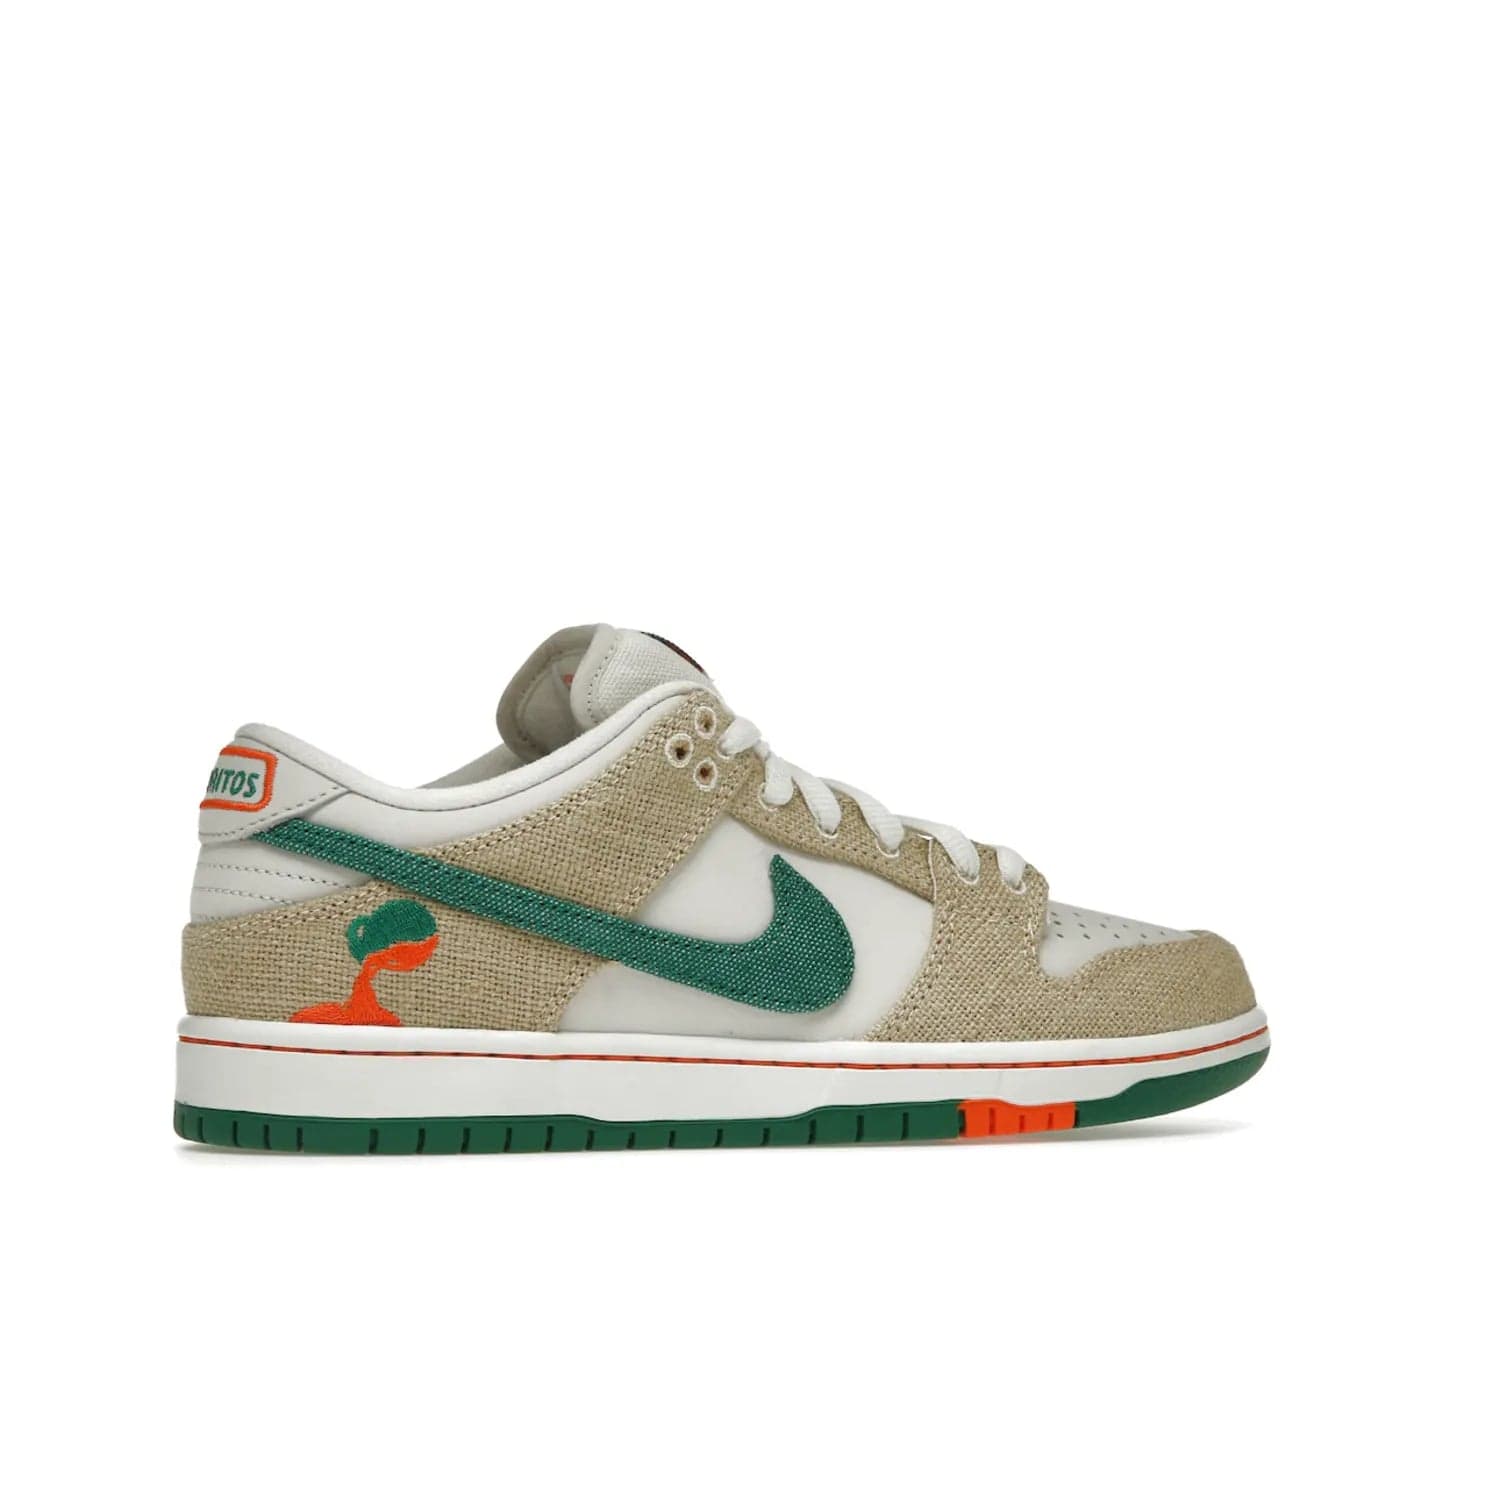 Nike SB Dunk Low Jarritos - Image 35 - Only at www.BallersClubKickz.com - Shop limited edition Nike SB Dunk Low Jarritos! Crafted with white leather and tear-away canvas materials with green accents. Includes orange, green, and white laces to customize your look. Available now.